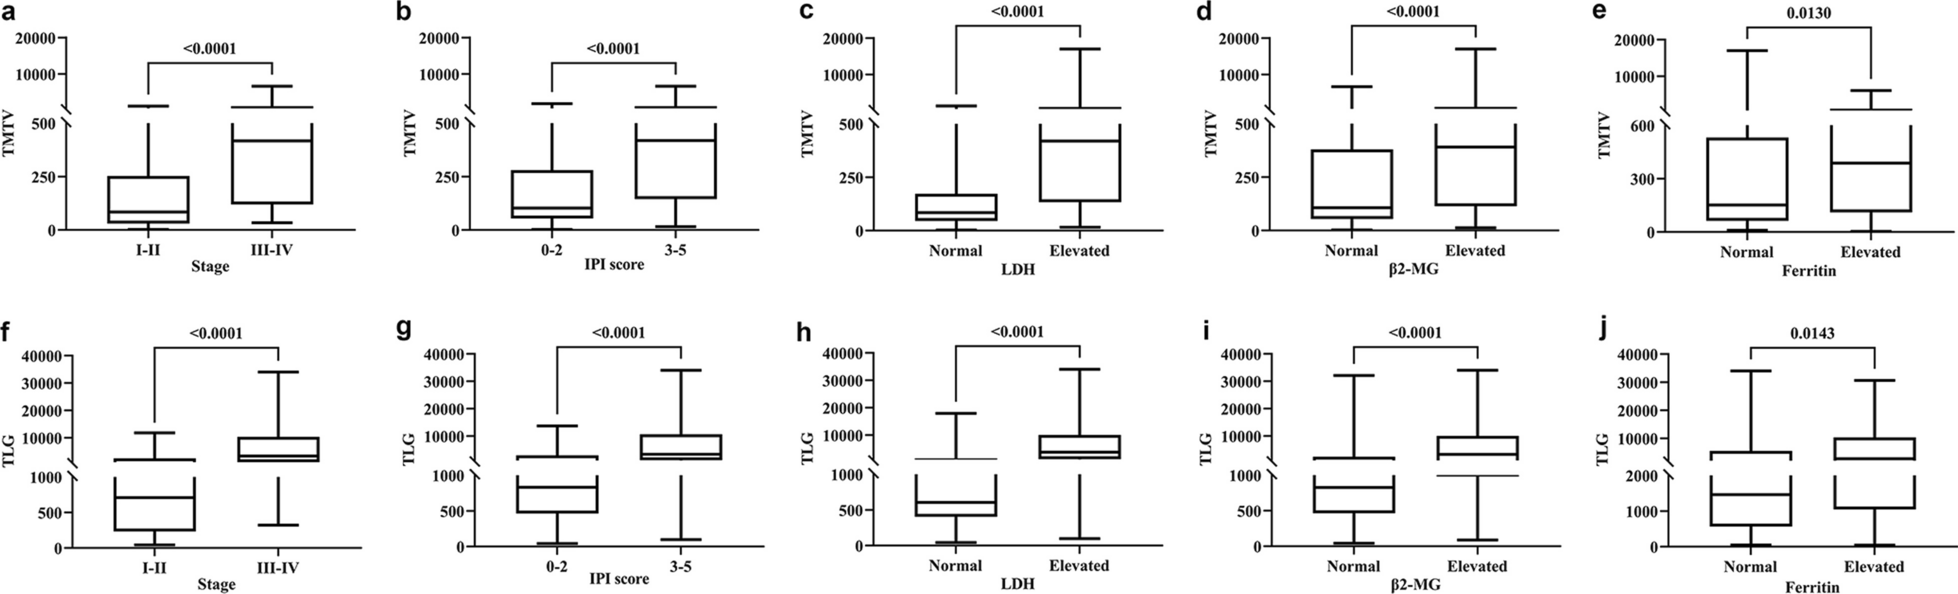 Evaluation of therapeutic effect and prognostic value of 18F-FDG PET/CT in different treatment nodes of DLBCL patients